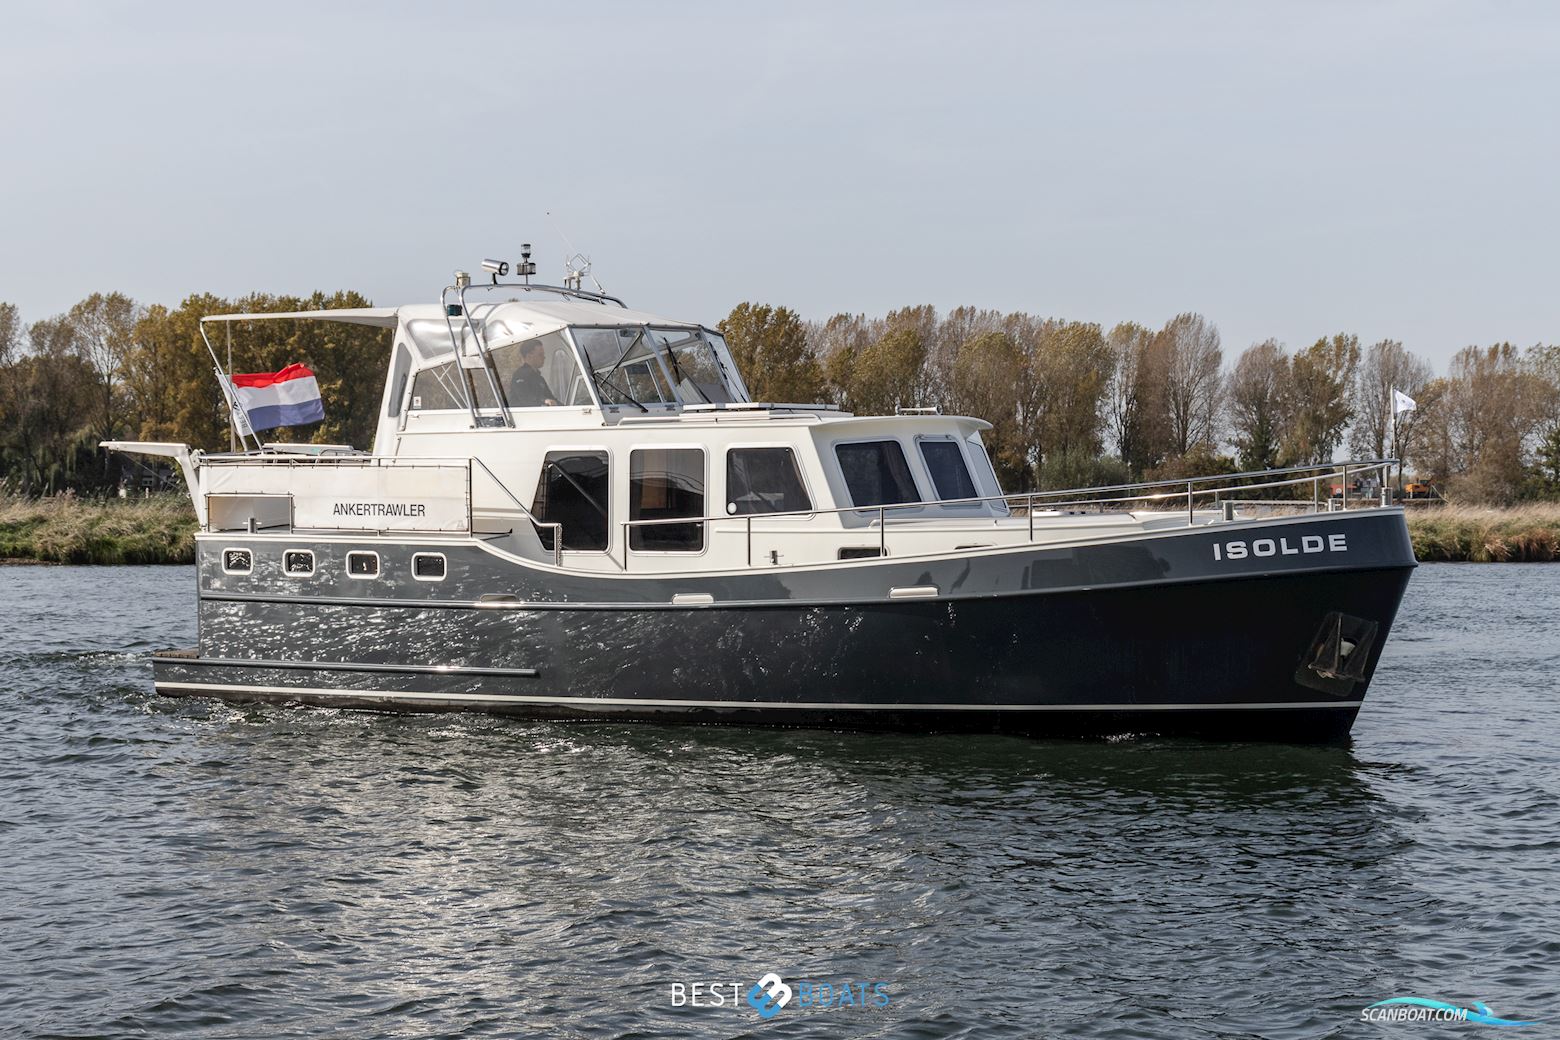 Anker Trawler 1100 AK Motor boat 1999, with Iveco-Aifo engine, The Netherlands